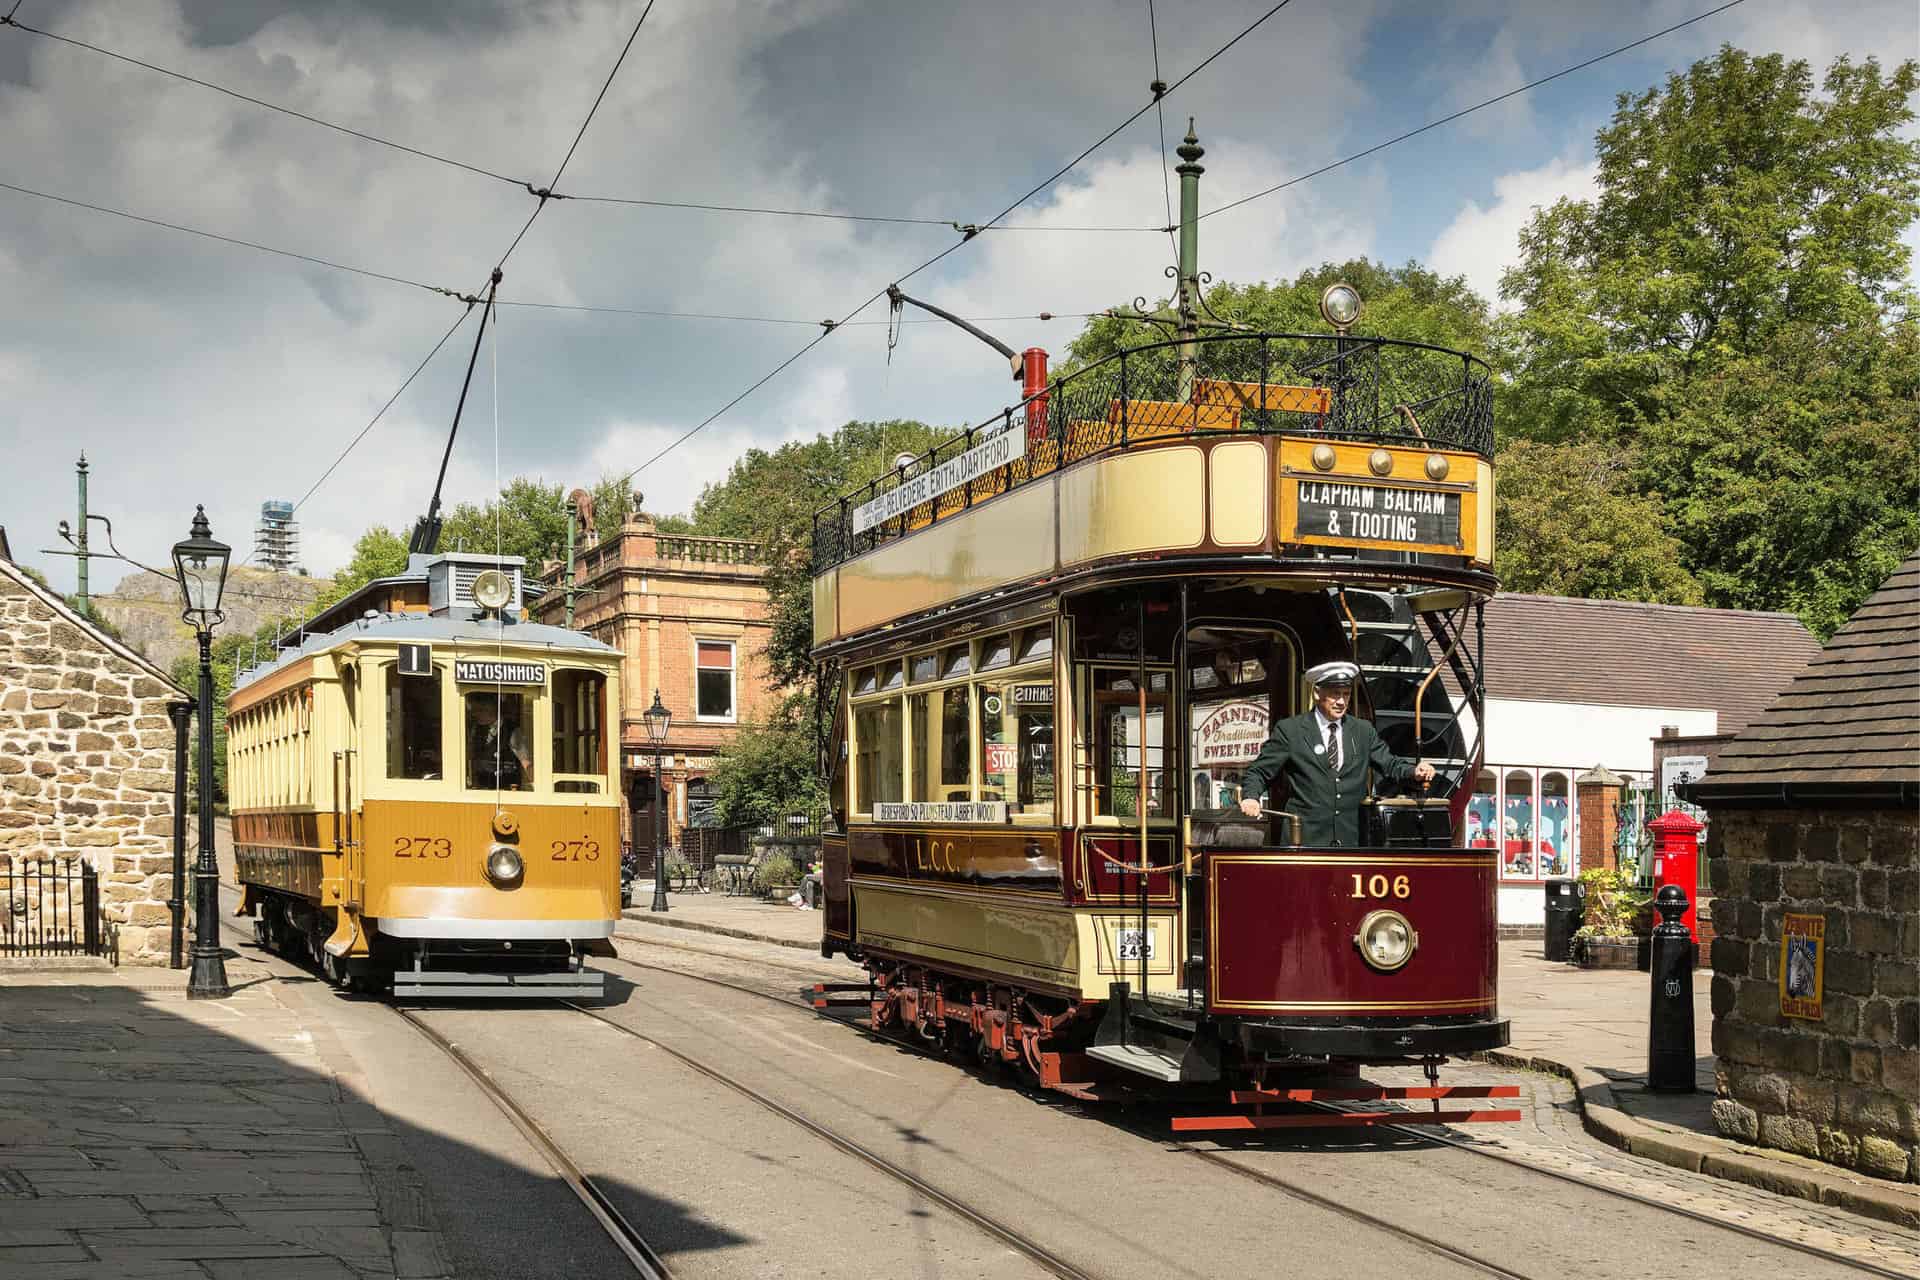 273 and 106 at crich tramway village (4000px)